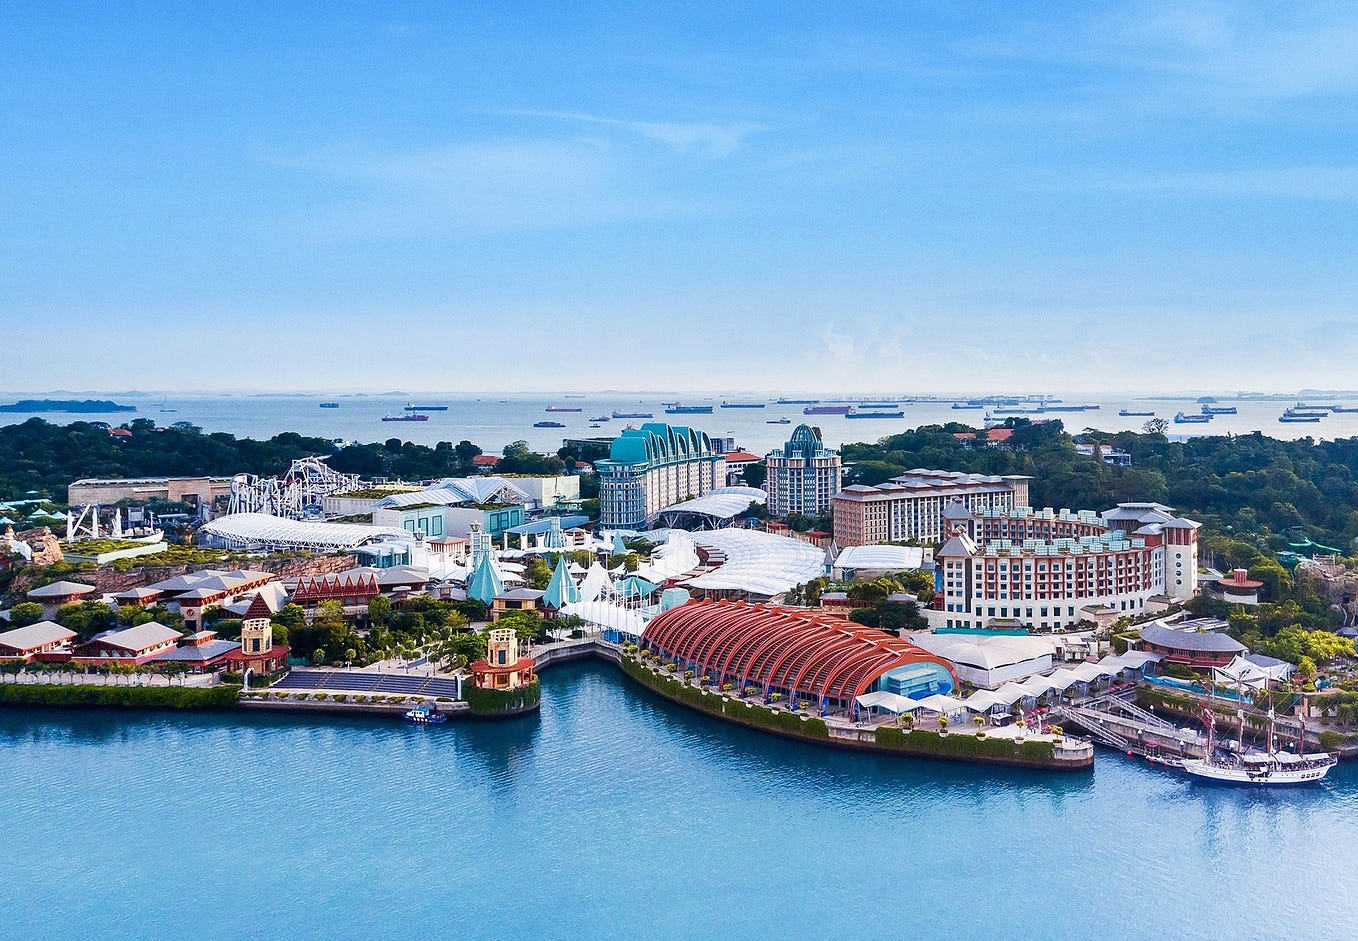 Helping Resorts World Sentosa Provide Services and Support On-Demand